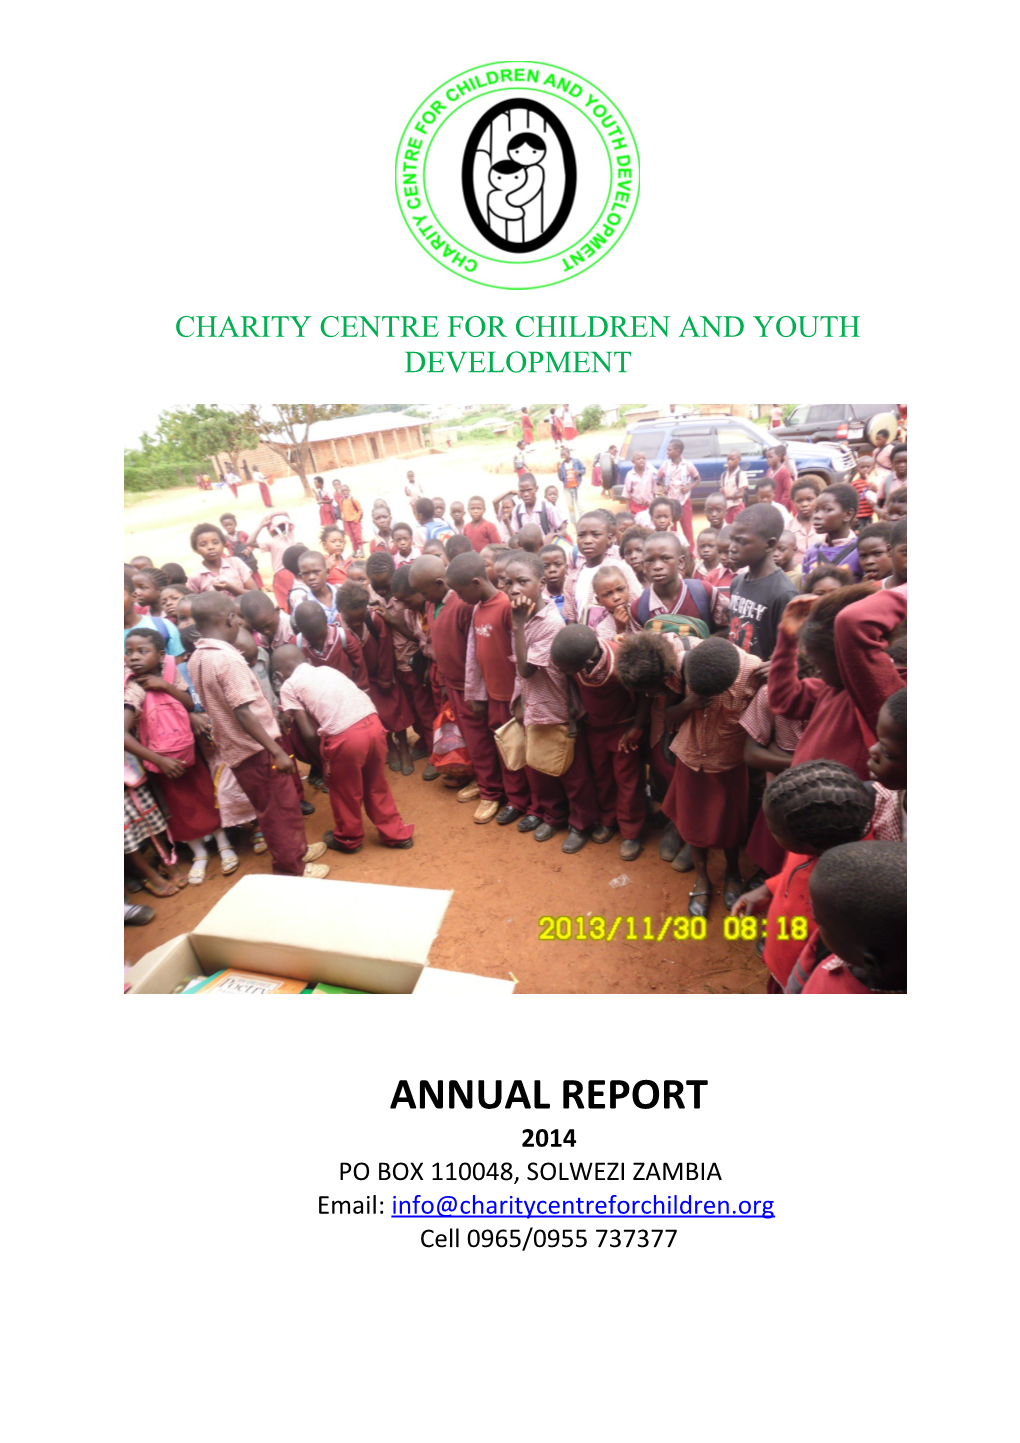 Charity Centre for Children and Youth Development